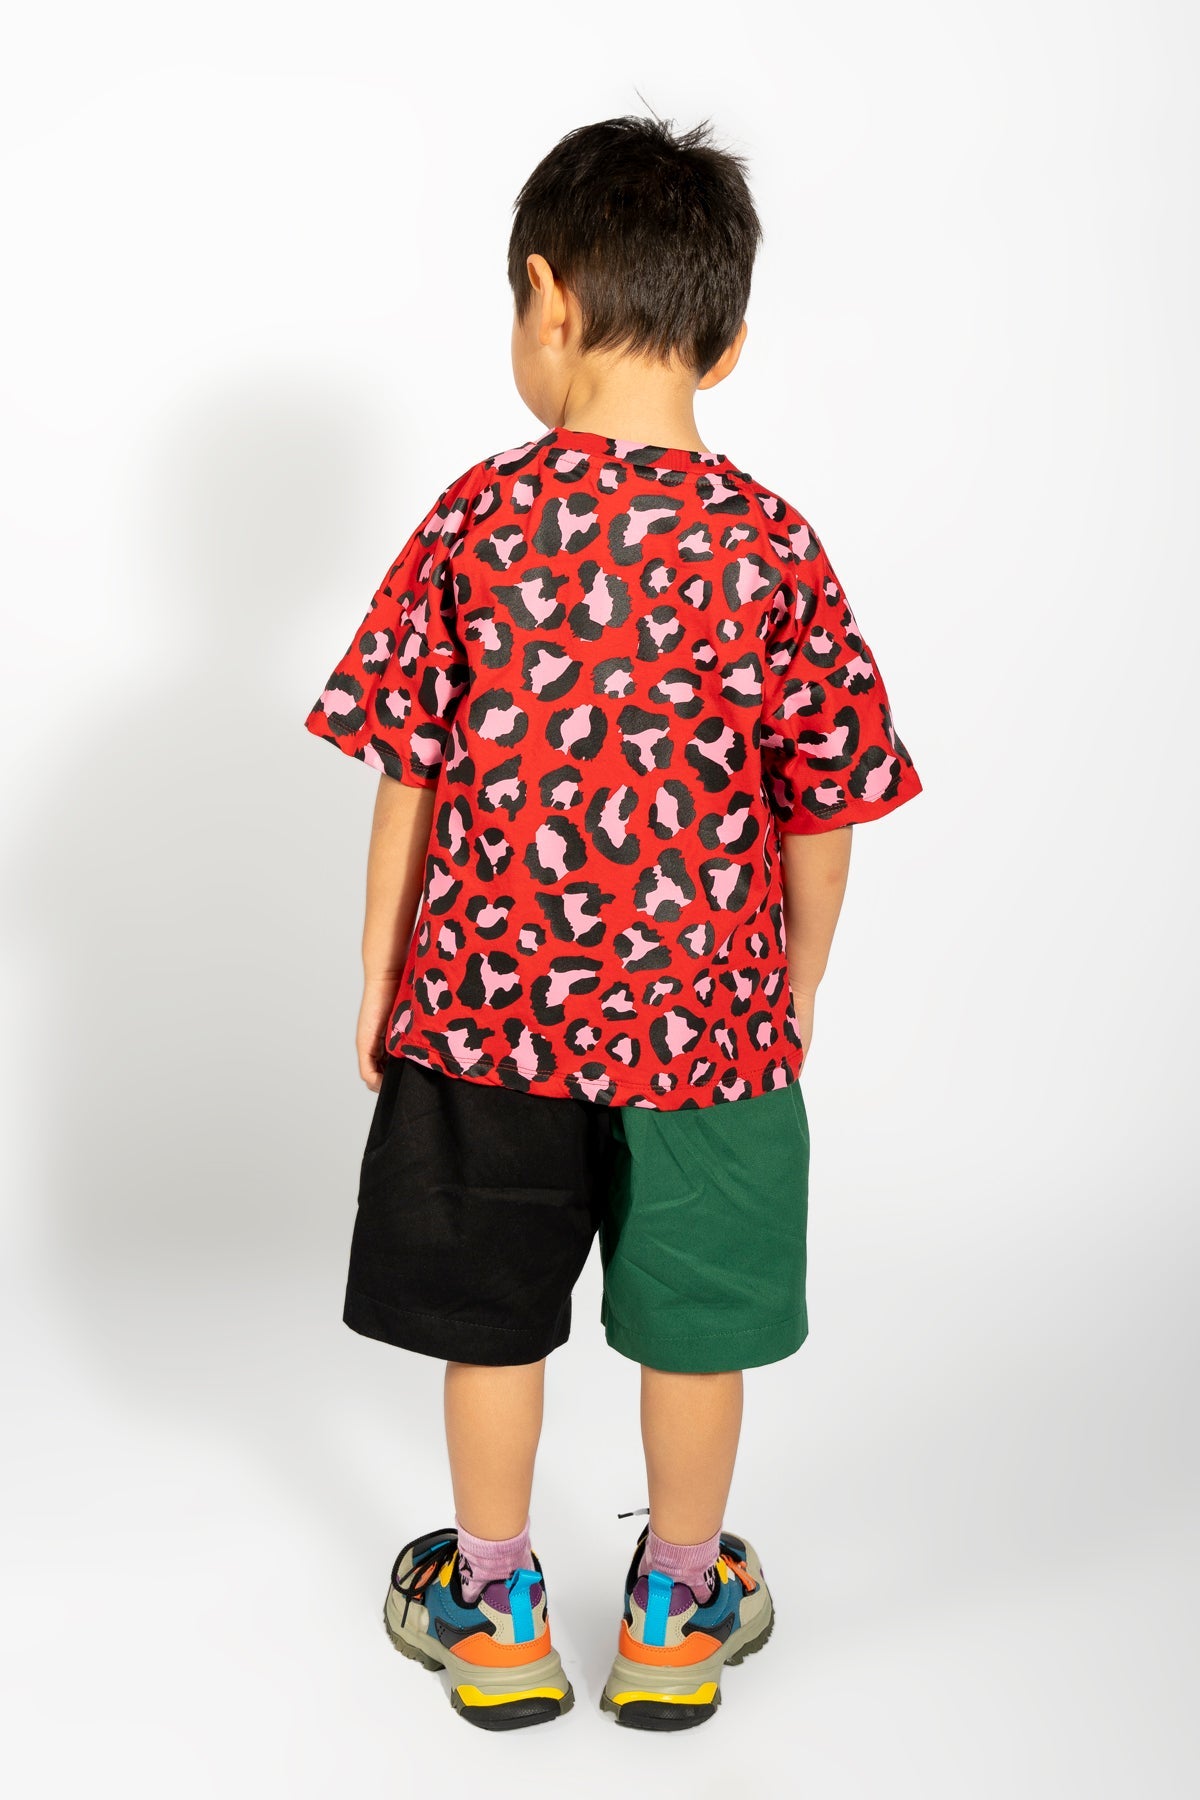 BLACK AND GREEN COTTON DRILL SHORTS CONTRASTING COLORS MA KIDS